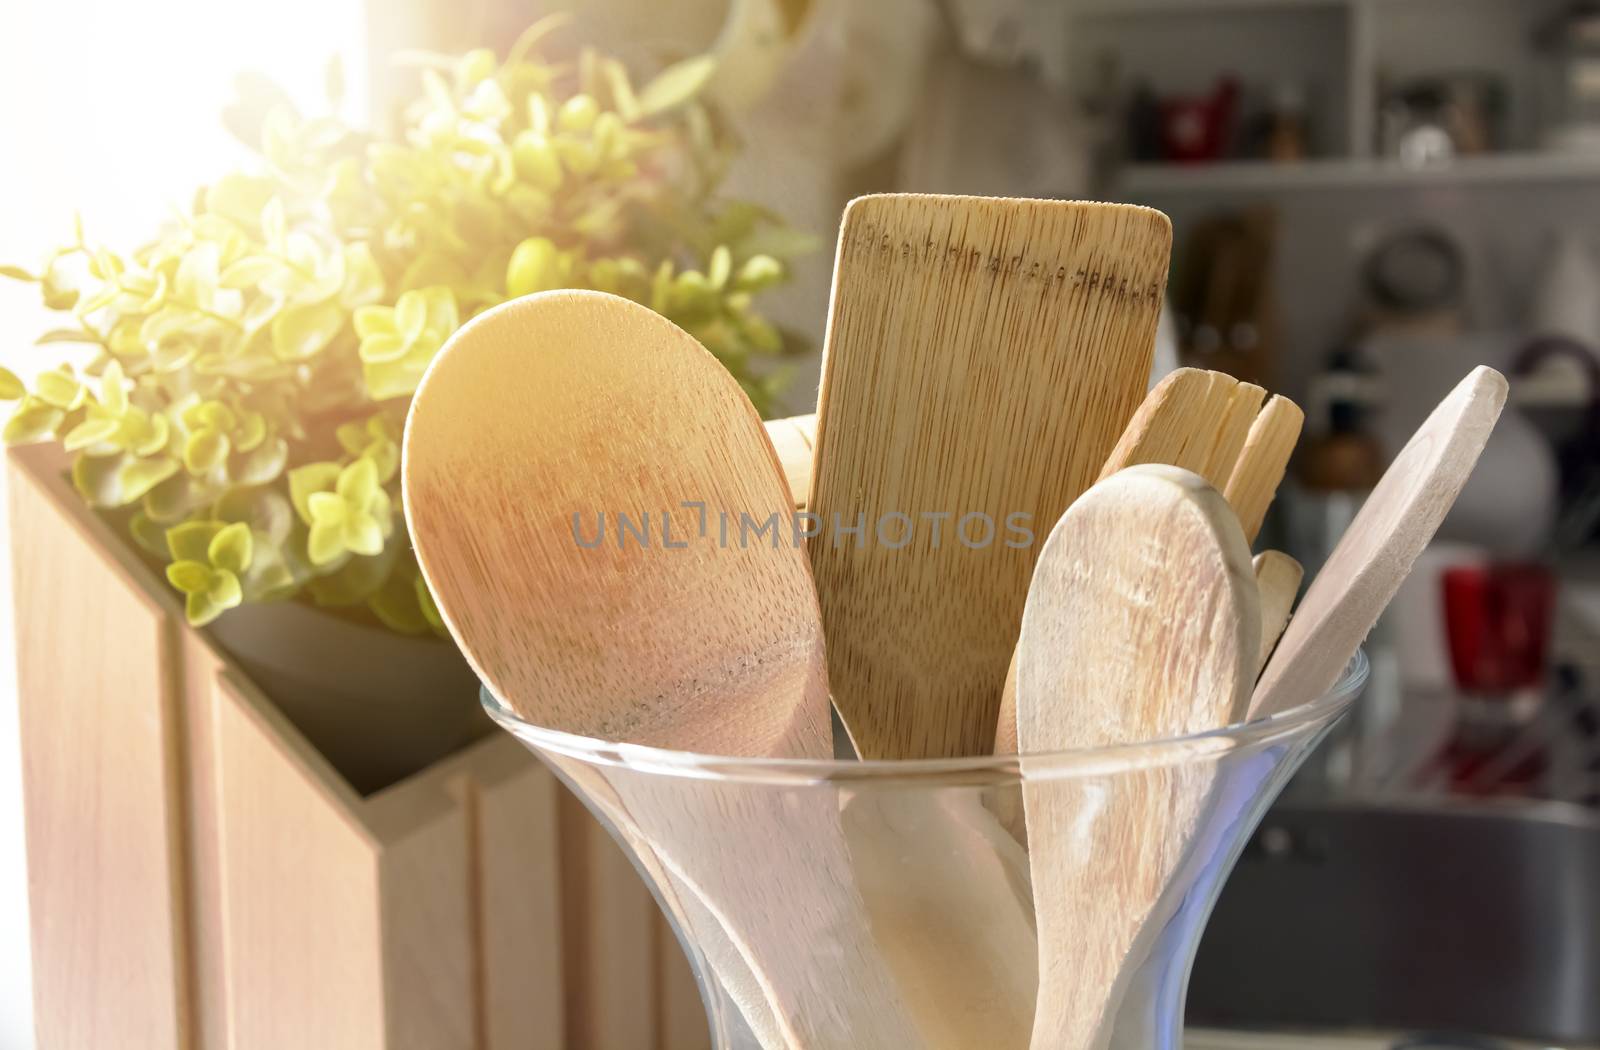 Close-up view of a group of wooden kitchen utensils inside a glass container. by rarrarorro